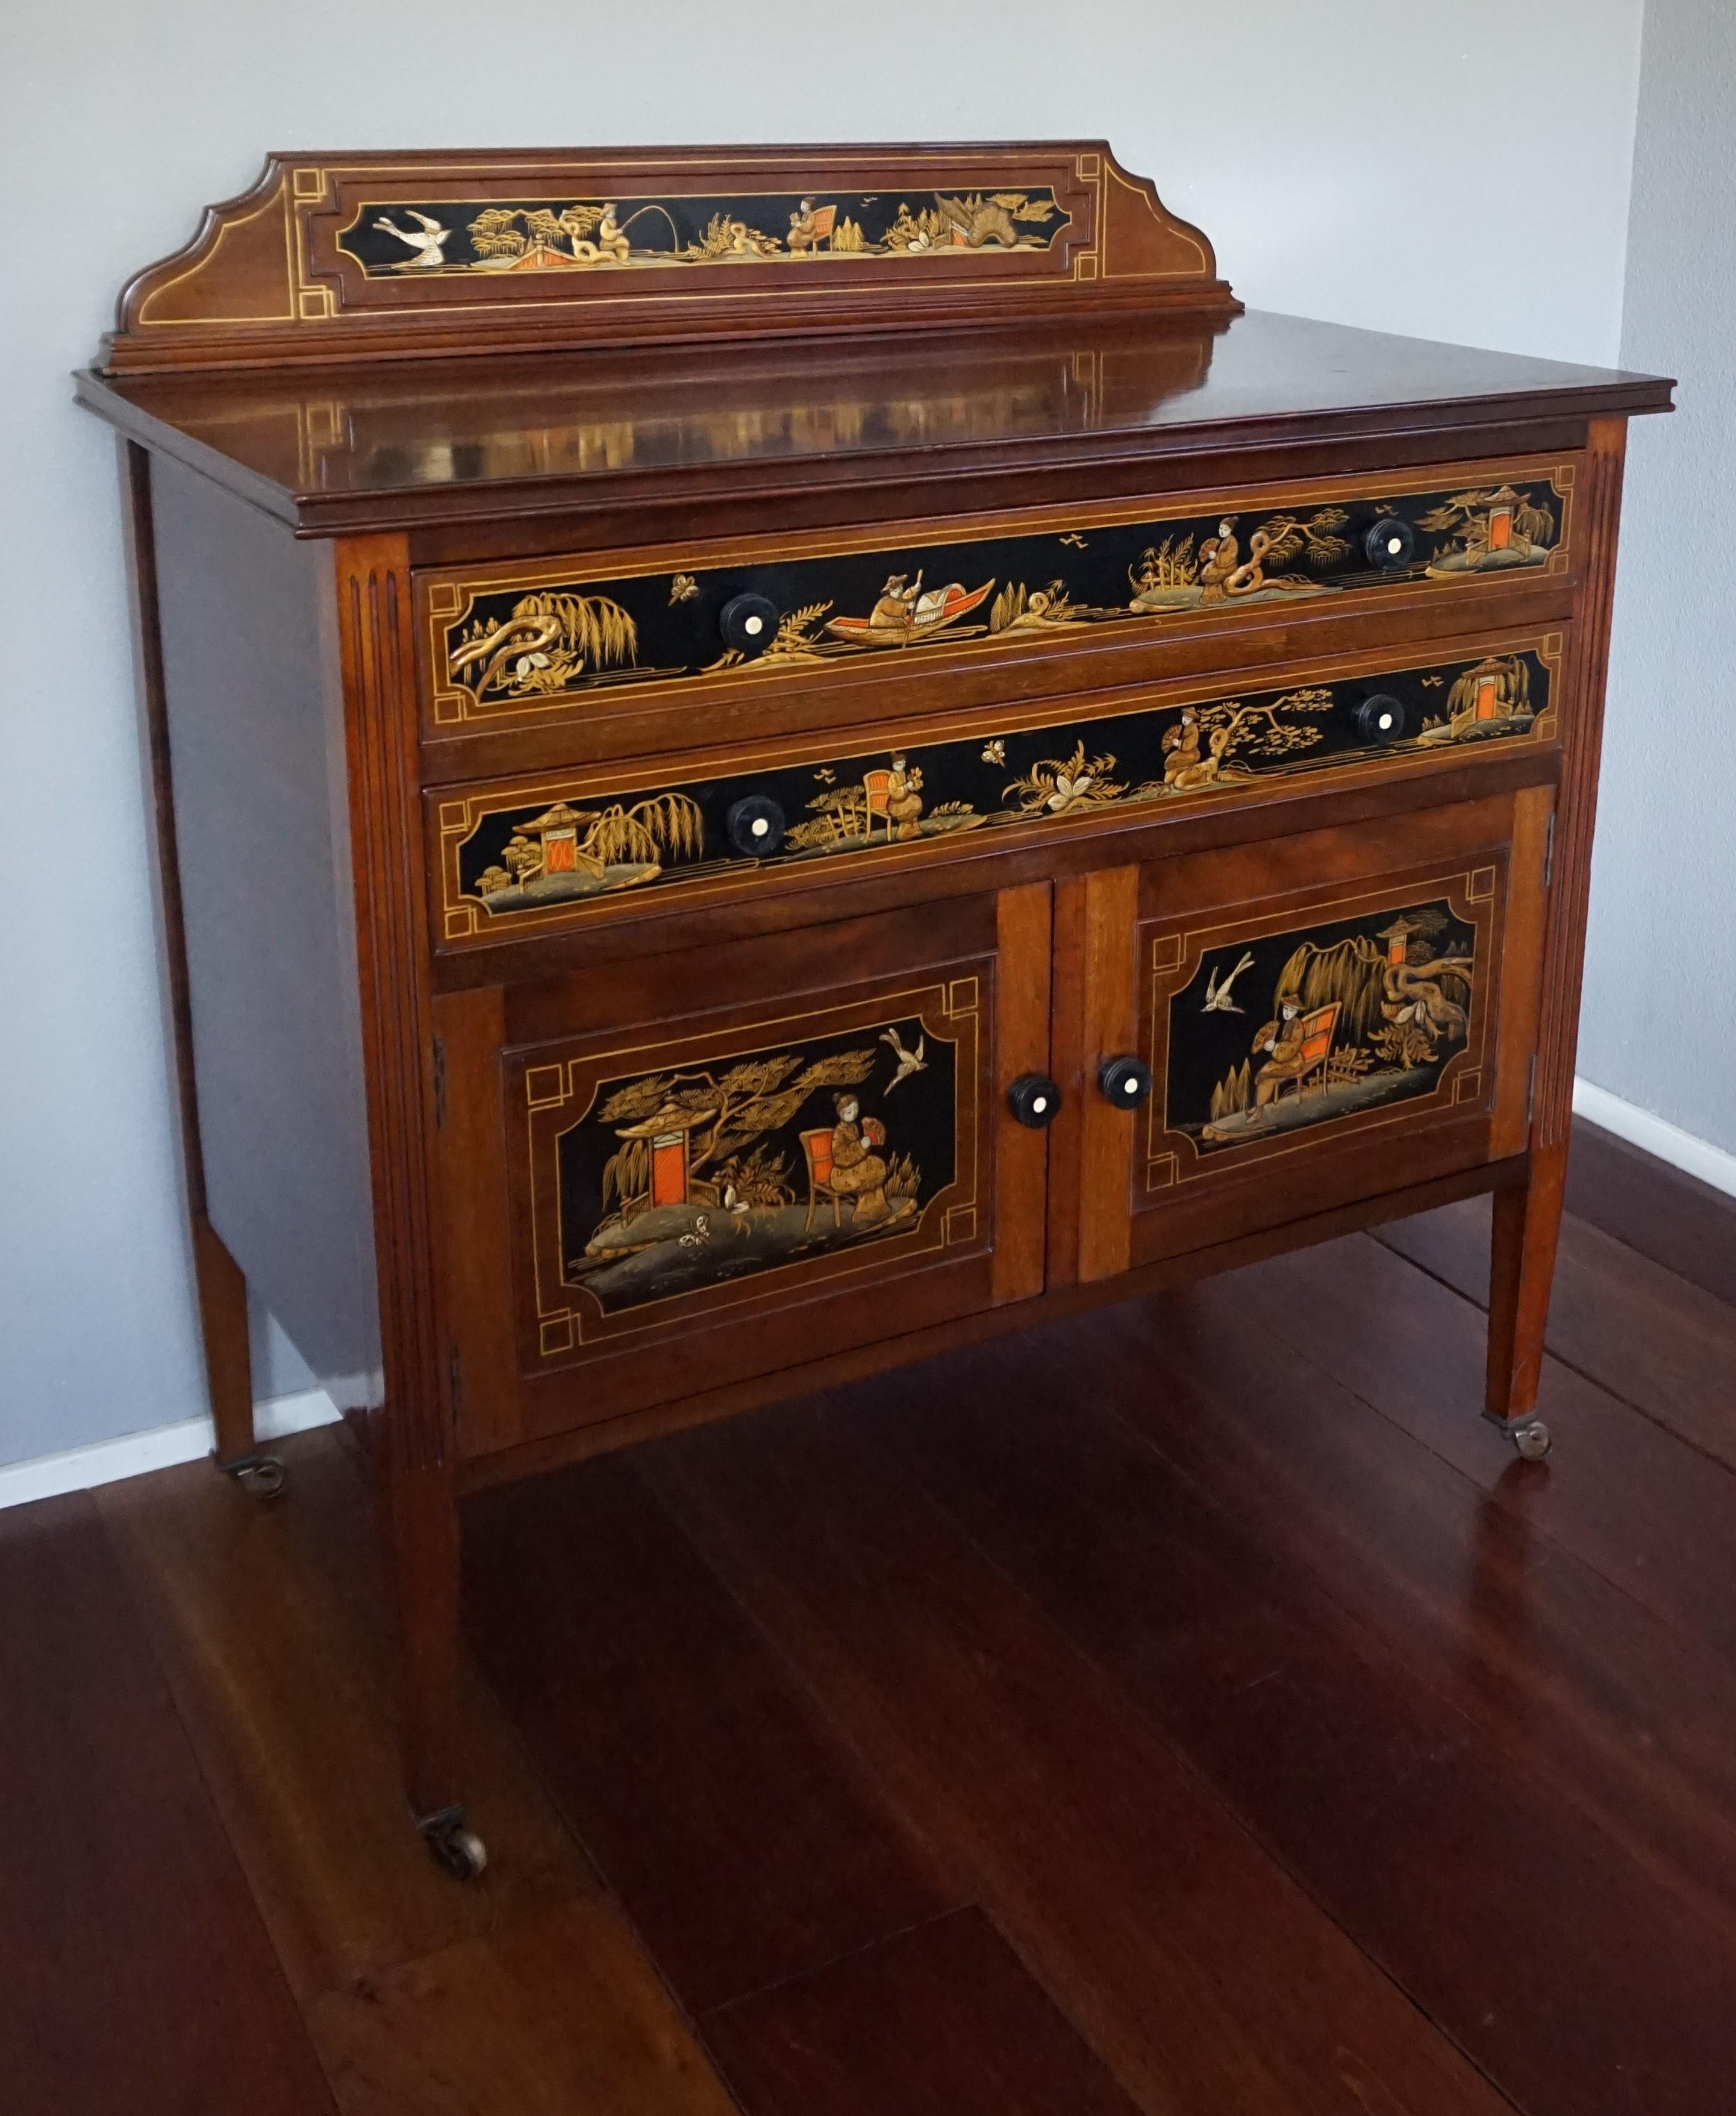 Antique & Hand-Painted, Mahogany Dresser / Commode in Stunning Chinoiserie Style 11